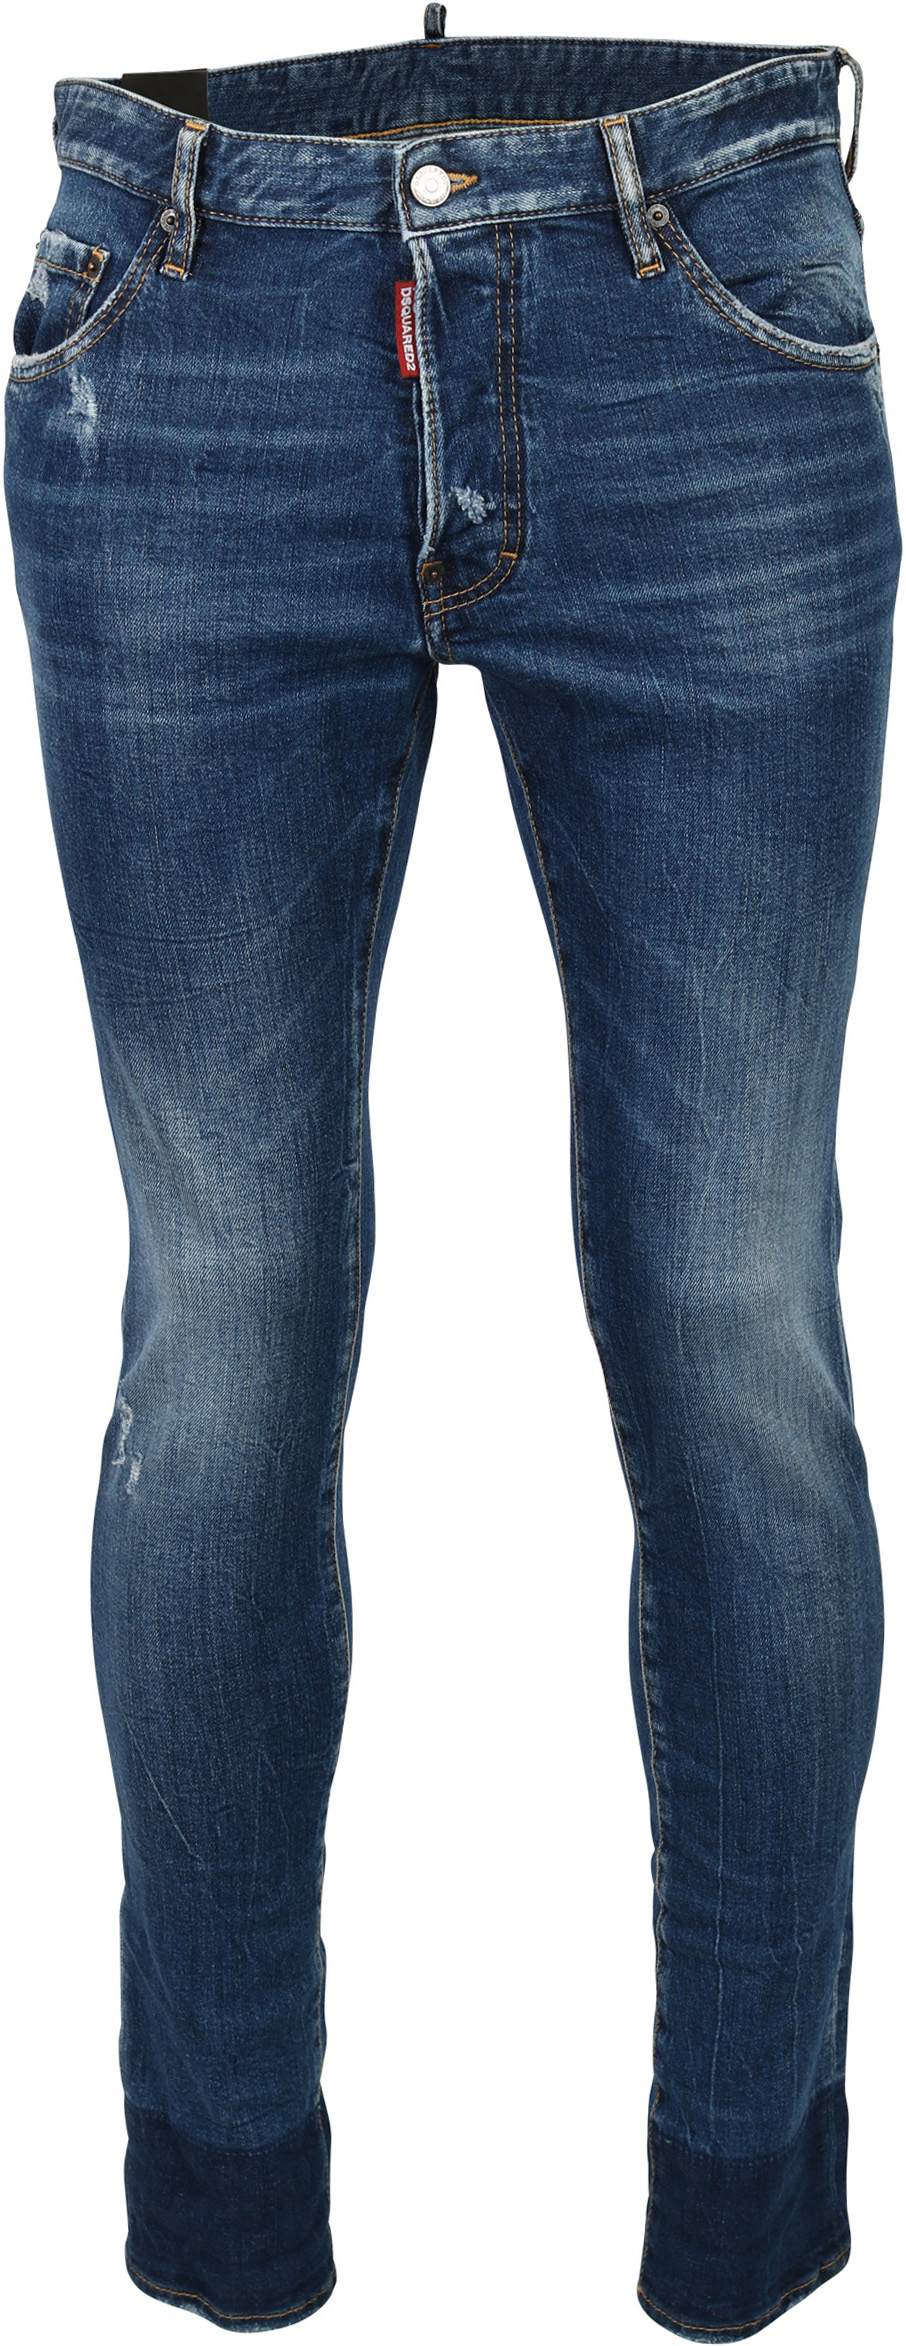 Dsquared Jeans Cool Guy Blue Washed 56